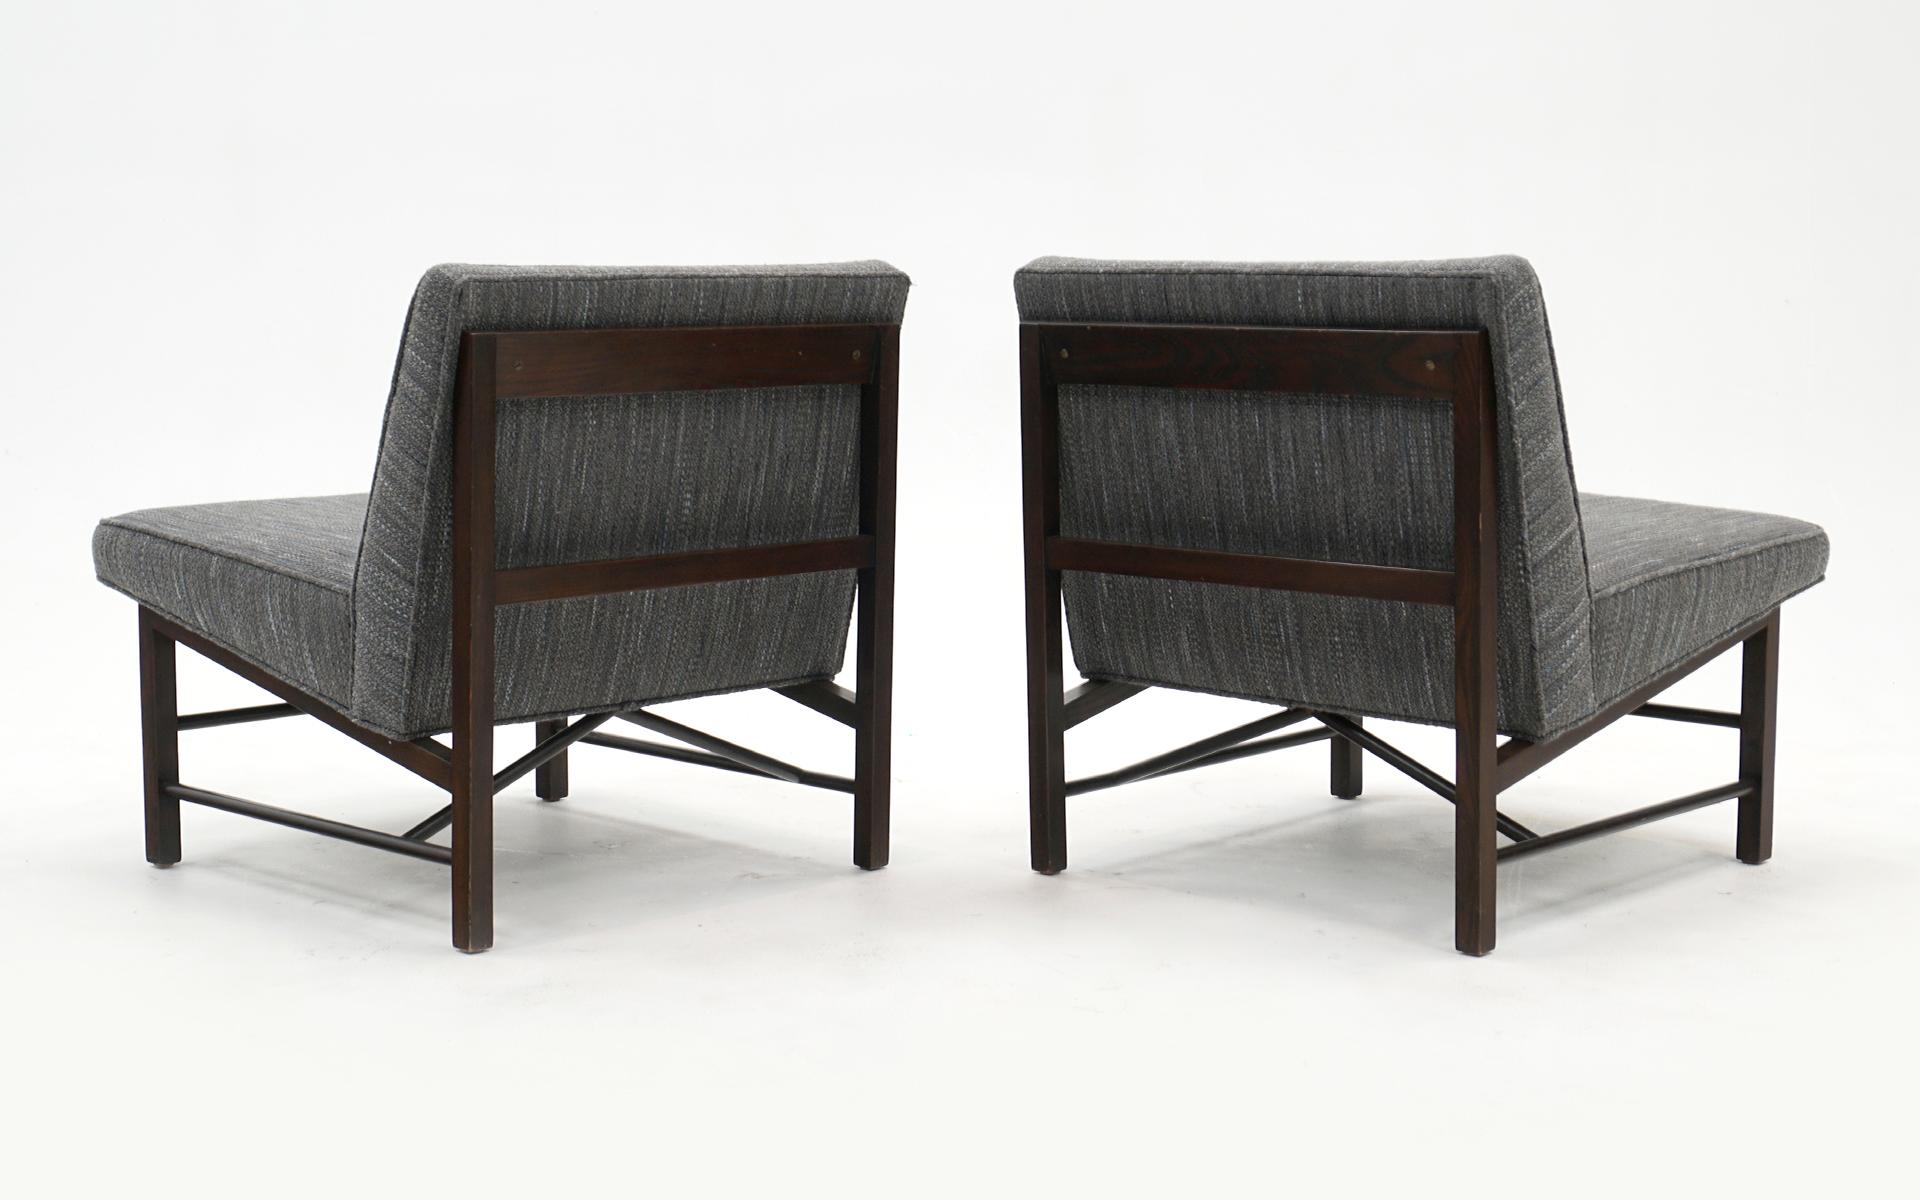 Mid-20th Century Pair Slipper Chairs by Edward Wormley for Dunbar, New Charcoal Gray Upholstery For Sale